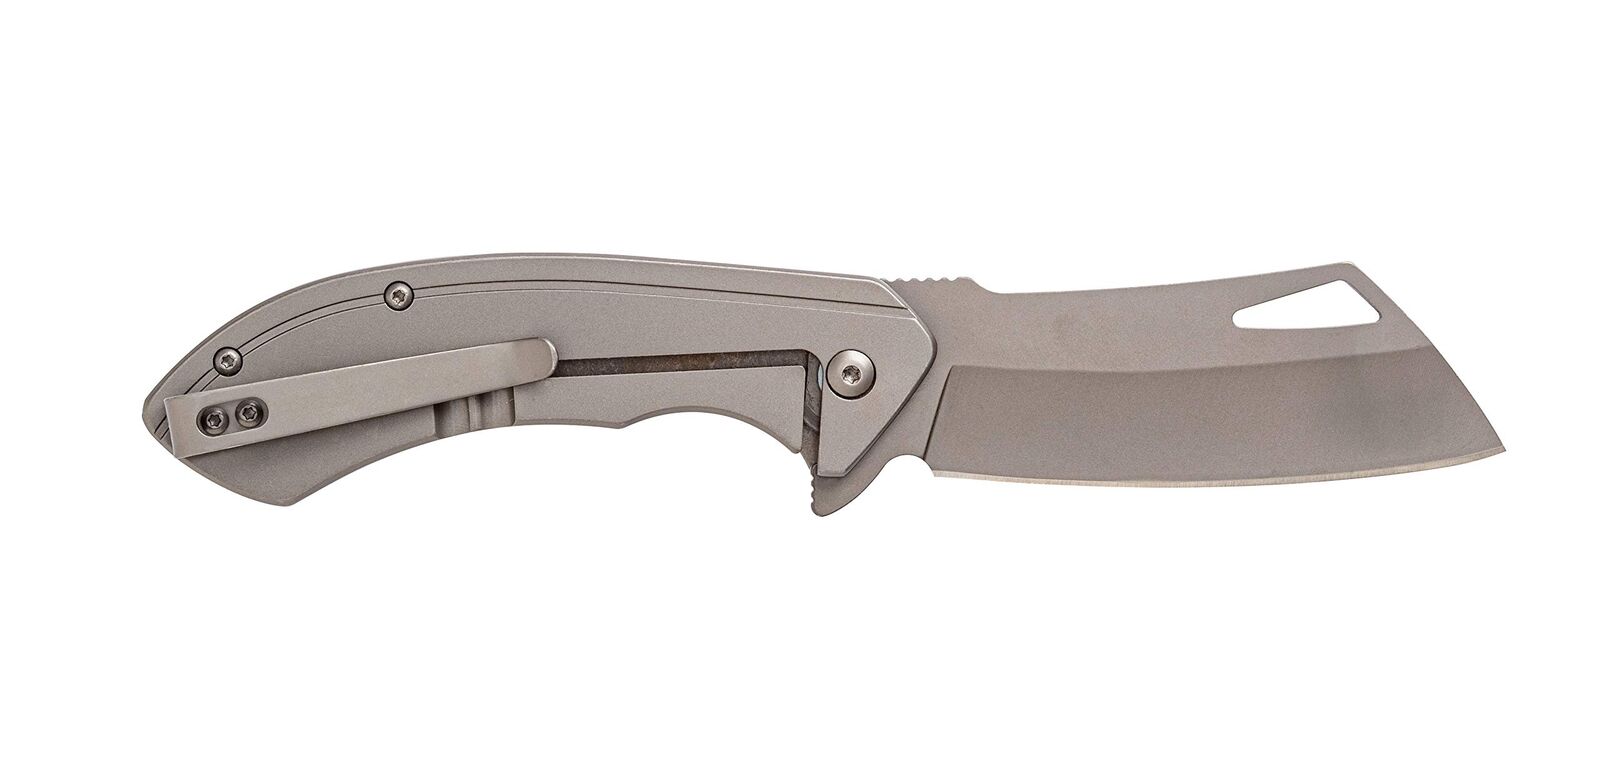 Smith's Consumer Products, Inc. 51141 Titania Knife Titanium Finished Cleaver